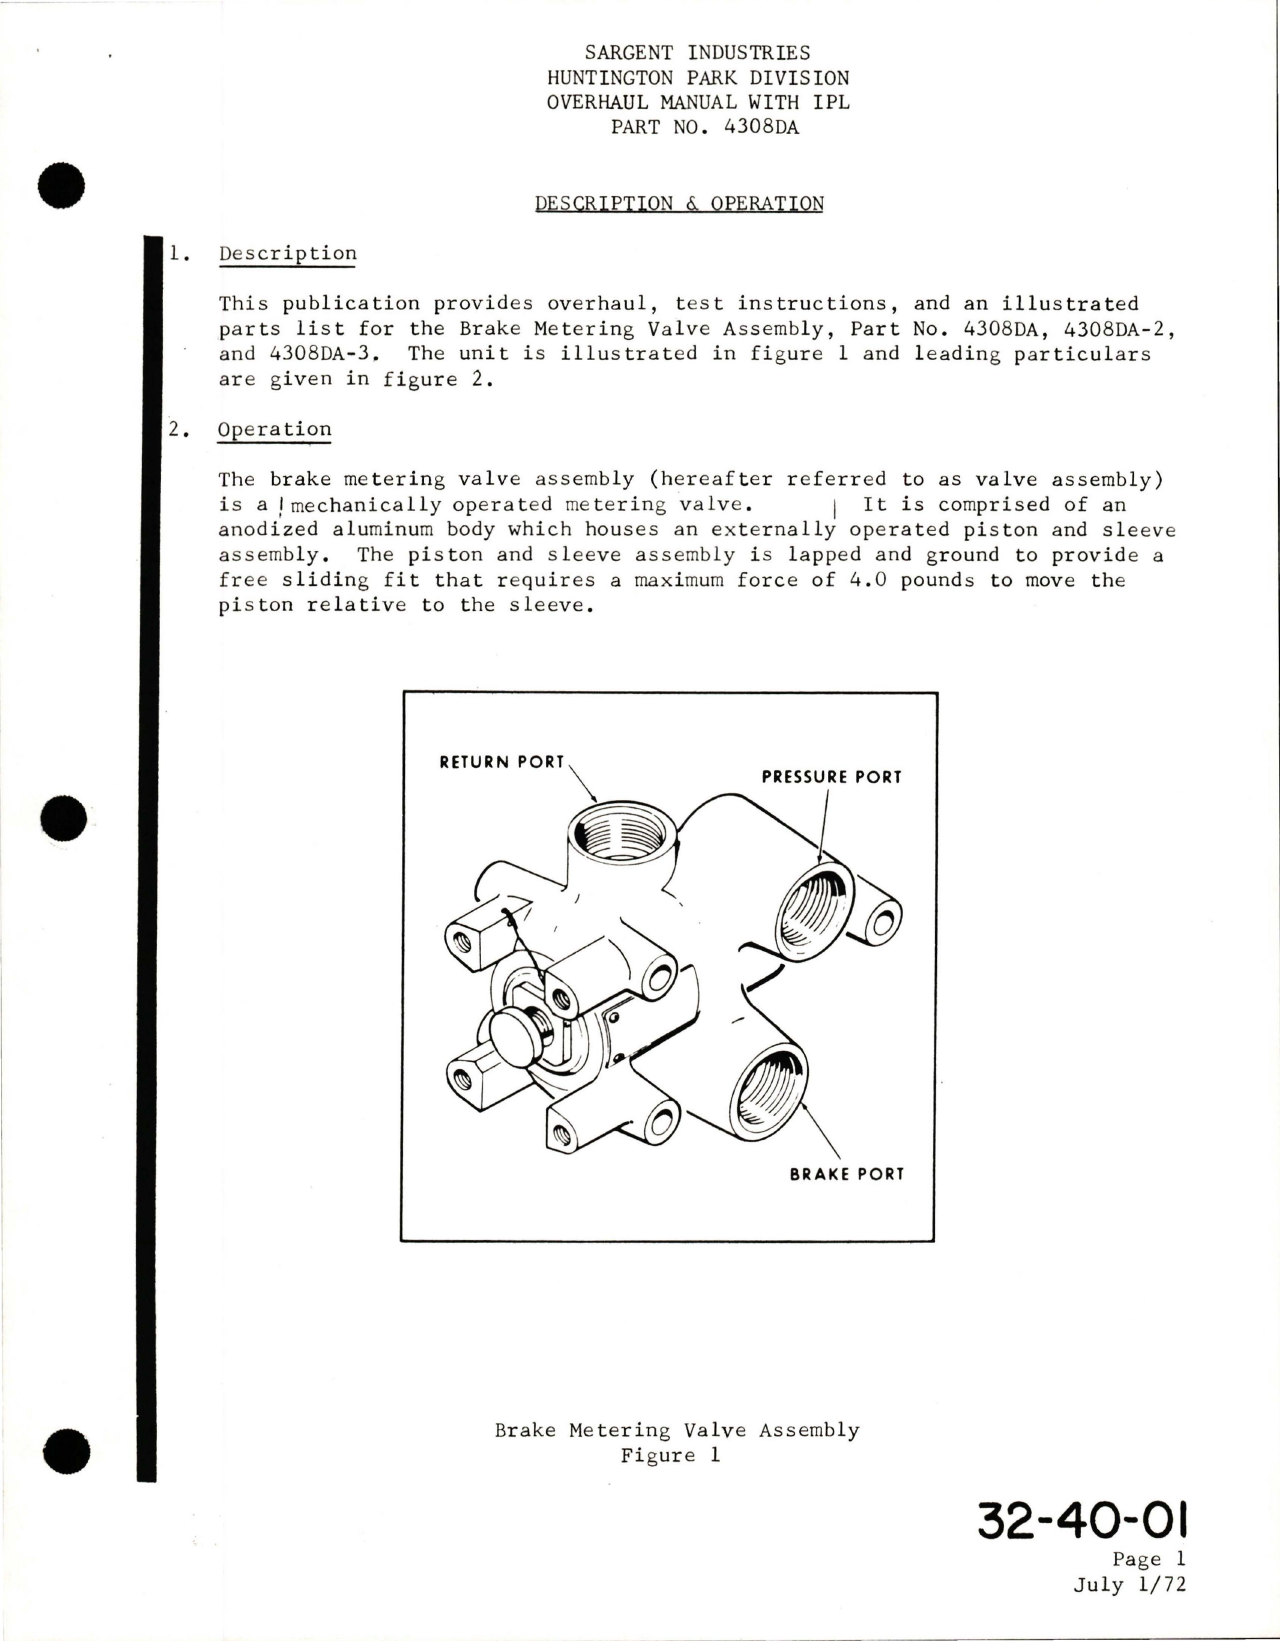 Sample page 7 from AirCorps Library document: Overhaul with Illustrated Parts List for Brake Metering Valve Assembly